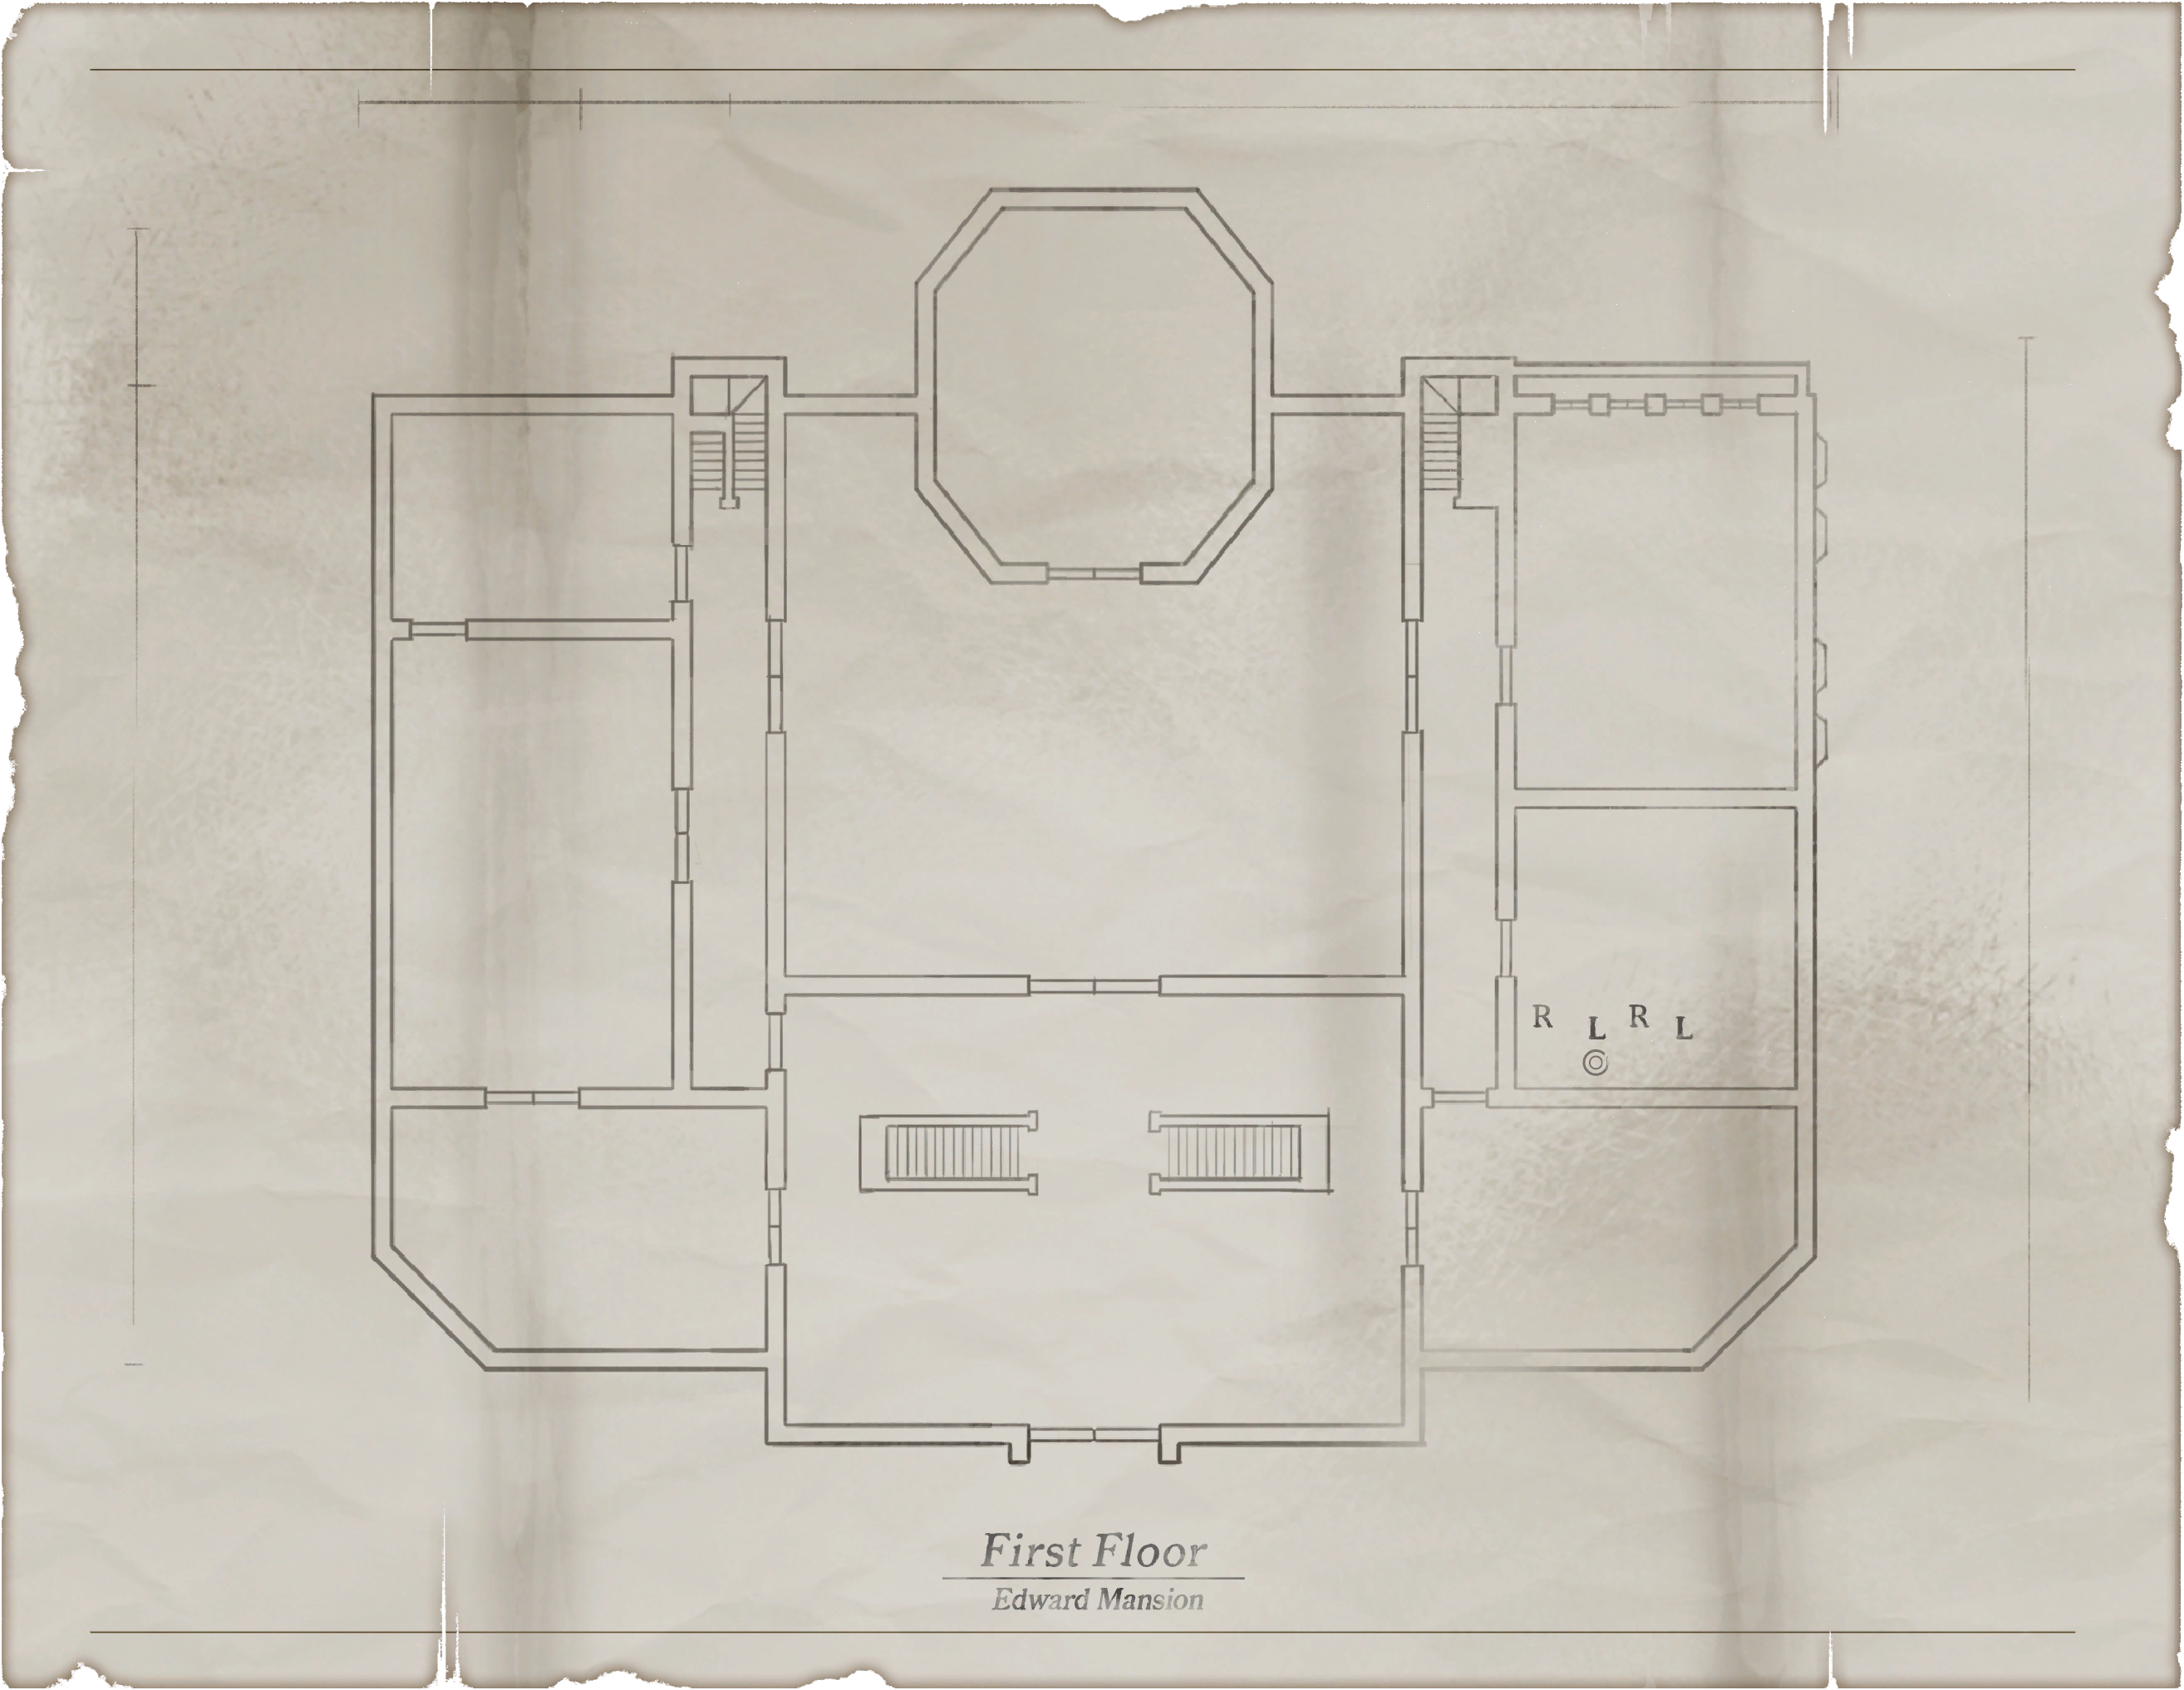 Another Code: Recollection - Edward Mansion - 1st Floor